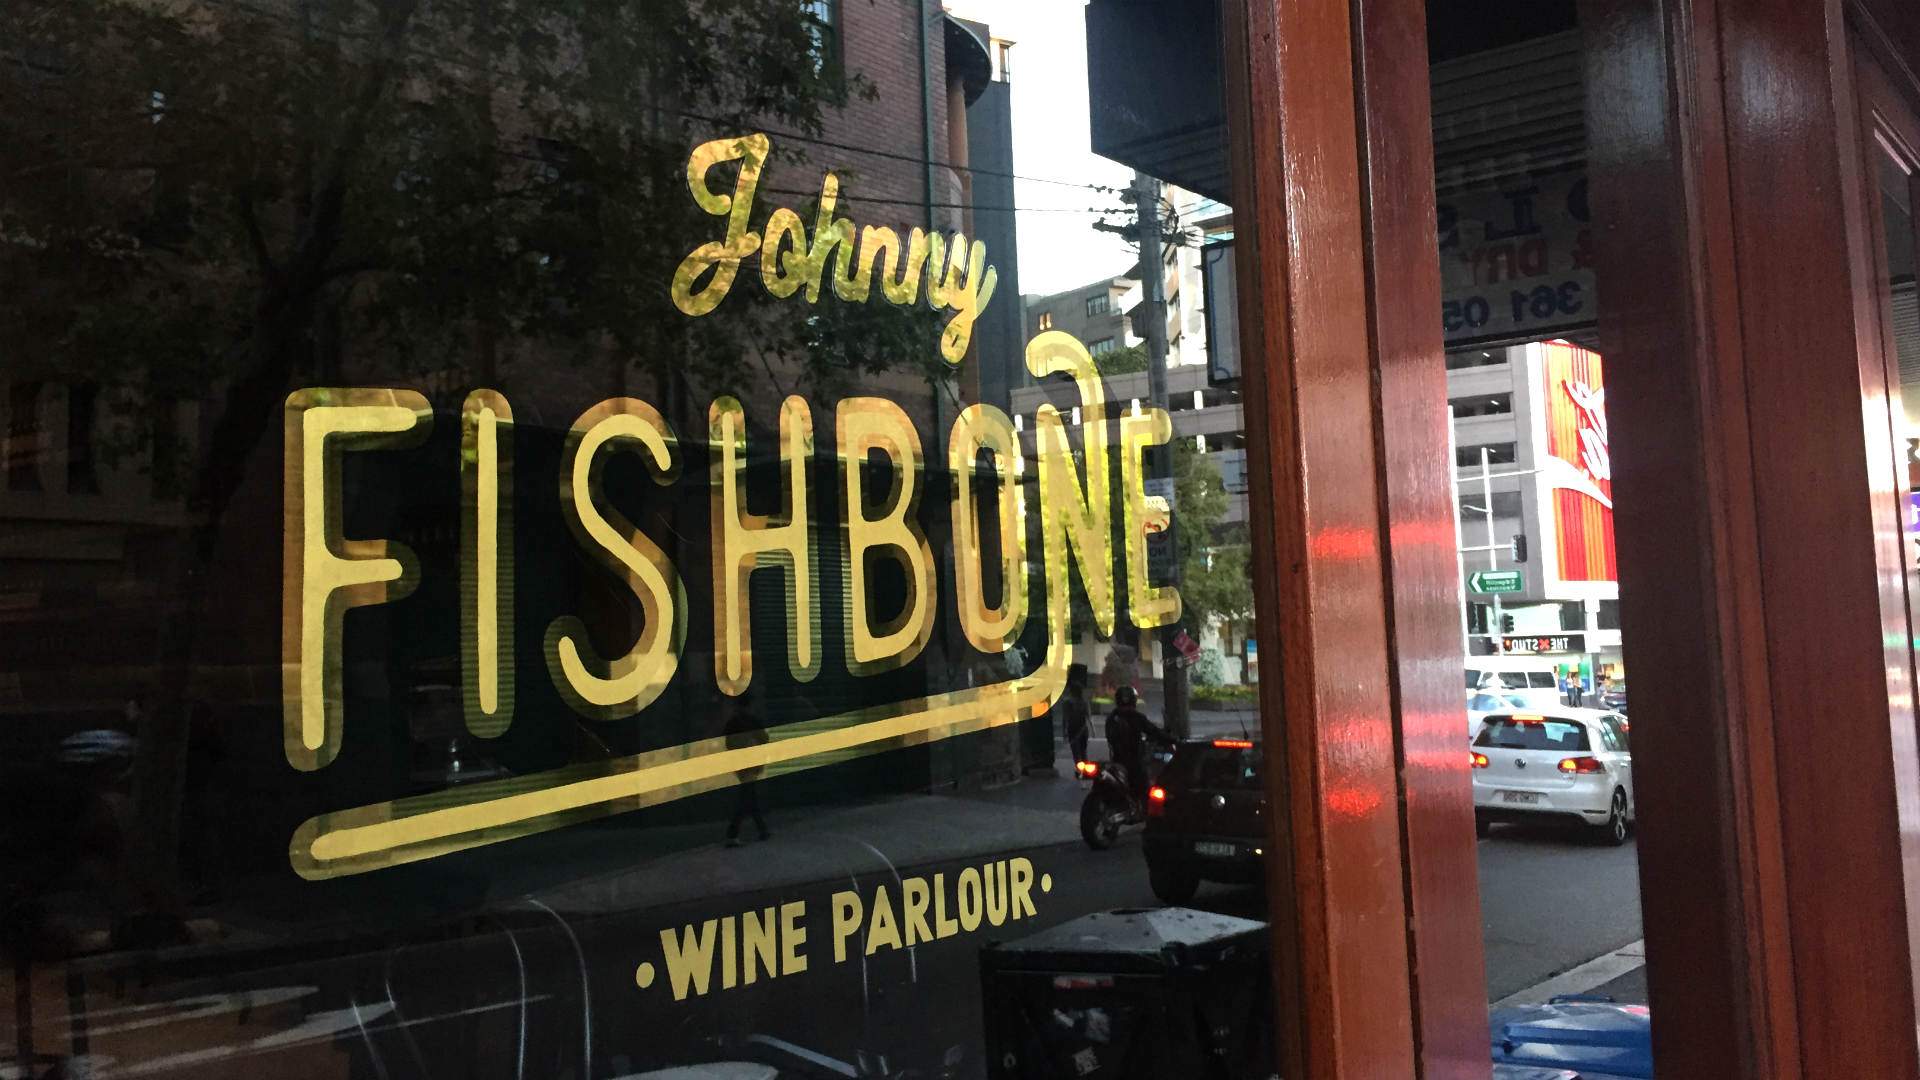 Darlinghurst Is Getting a New Wine Parlour Called Johnny Fishbone